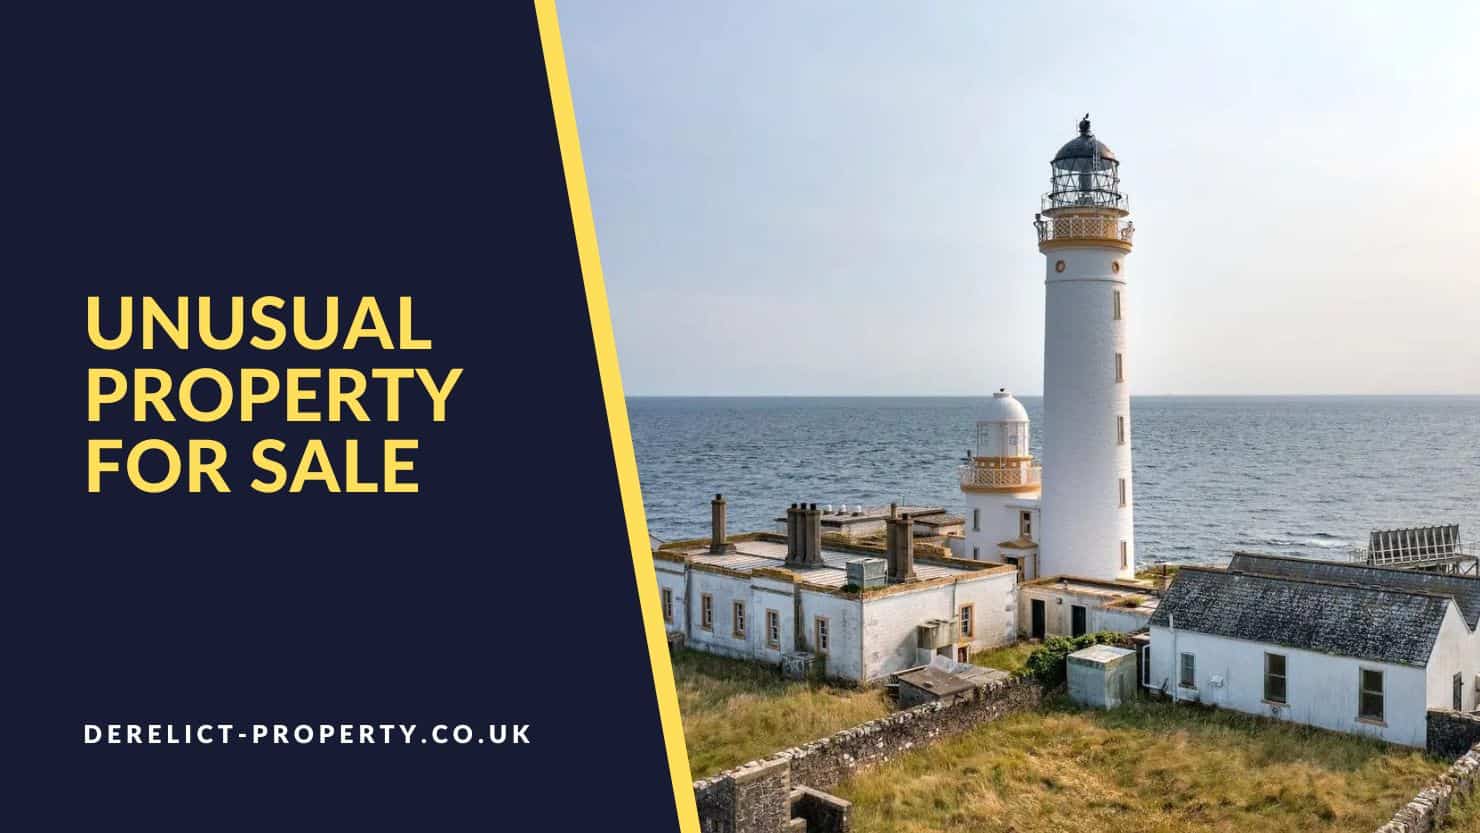 Unusual property for sale